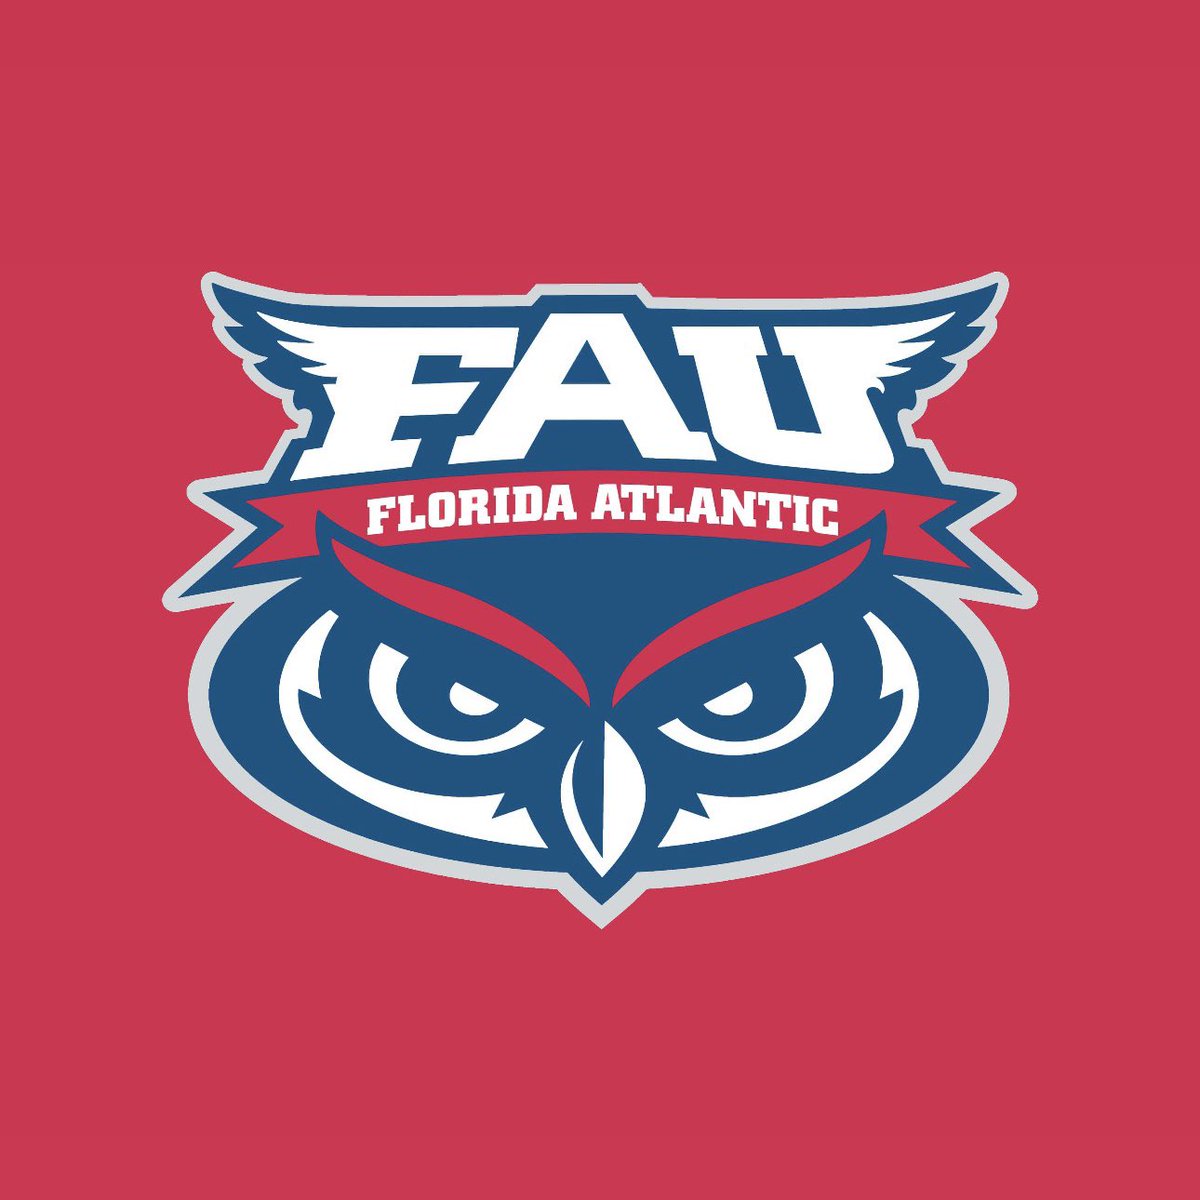 BLESSED! I’m thankful to announce I have received an Offer from FAU!! #GoOwls 🔴🔵 @beaty_david @HarrisNOFLYZONE @FAUFootball @CoachTroop3 @coach_o_sports @NateRozzelle @unclelukereal1